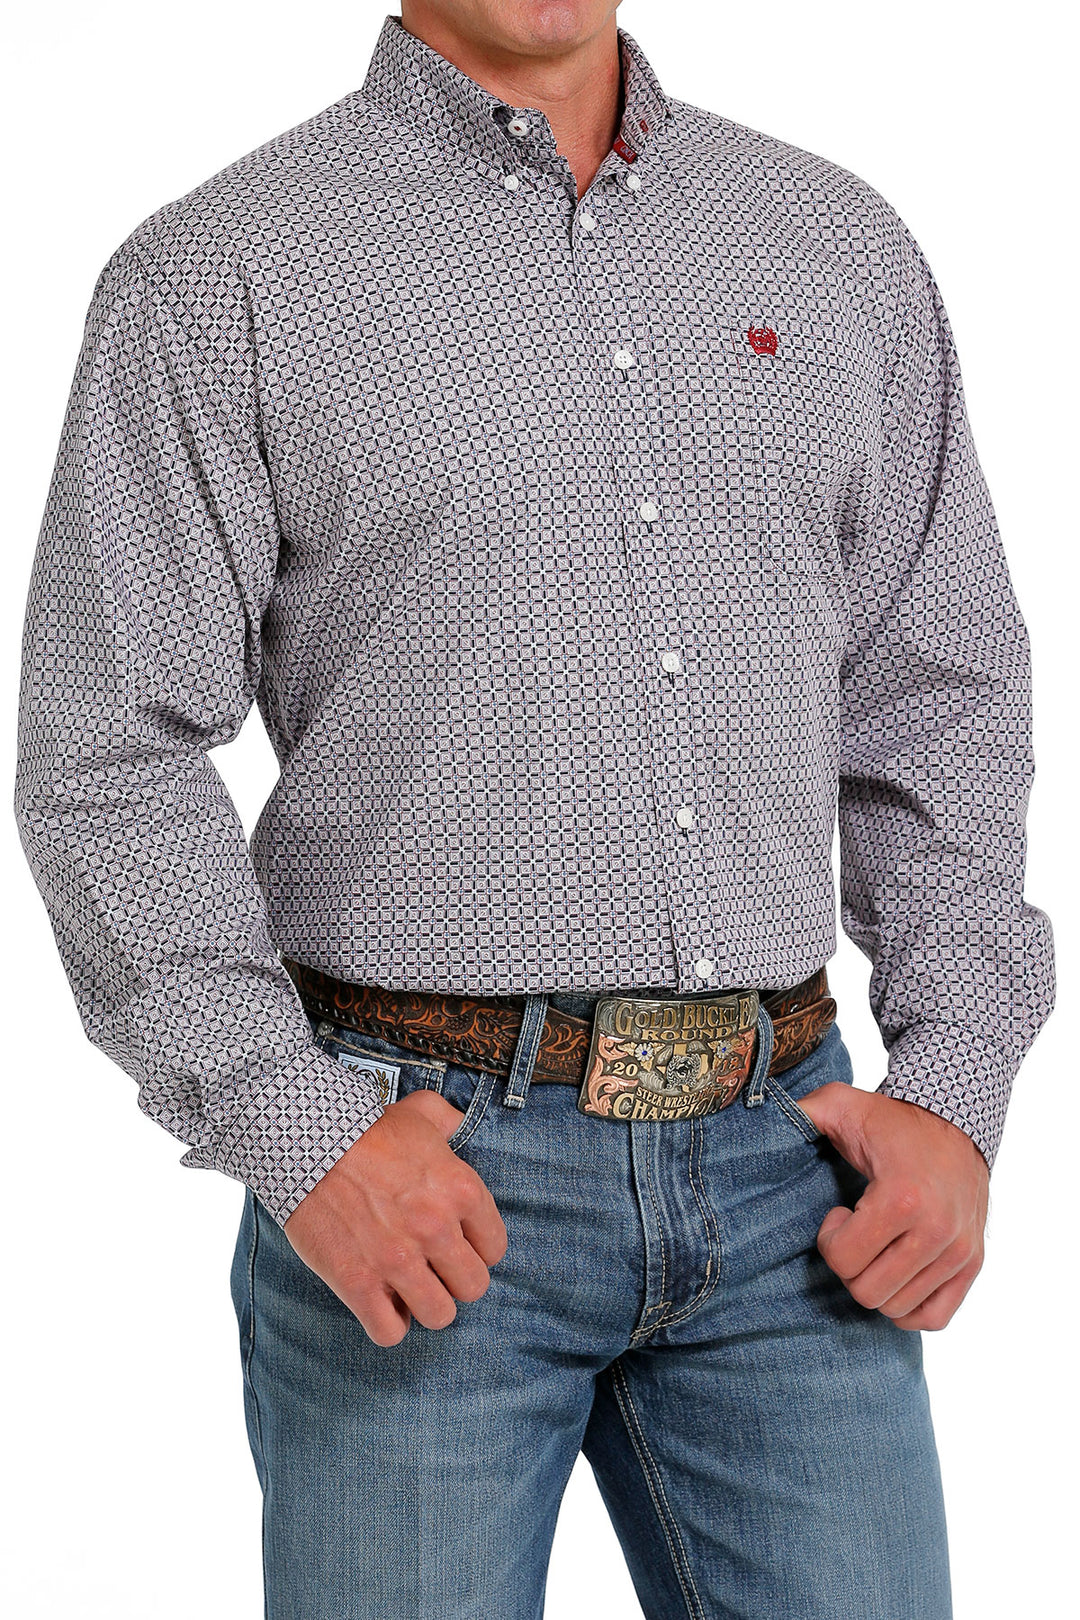 Cinch Men's Blue and Red Geometric Button Down Western Shirt